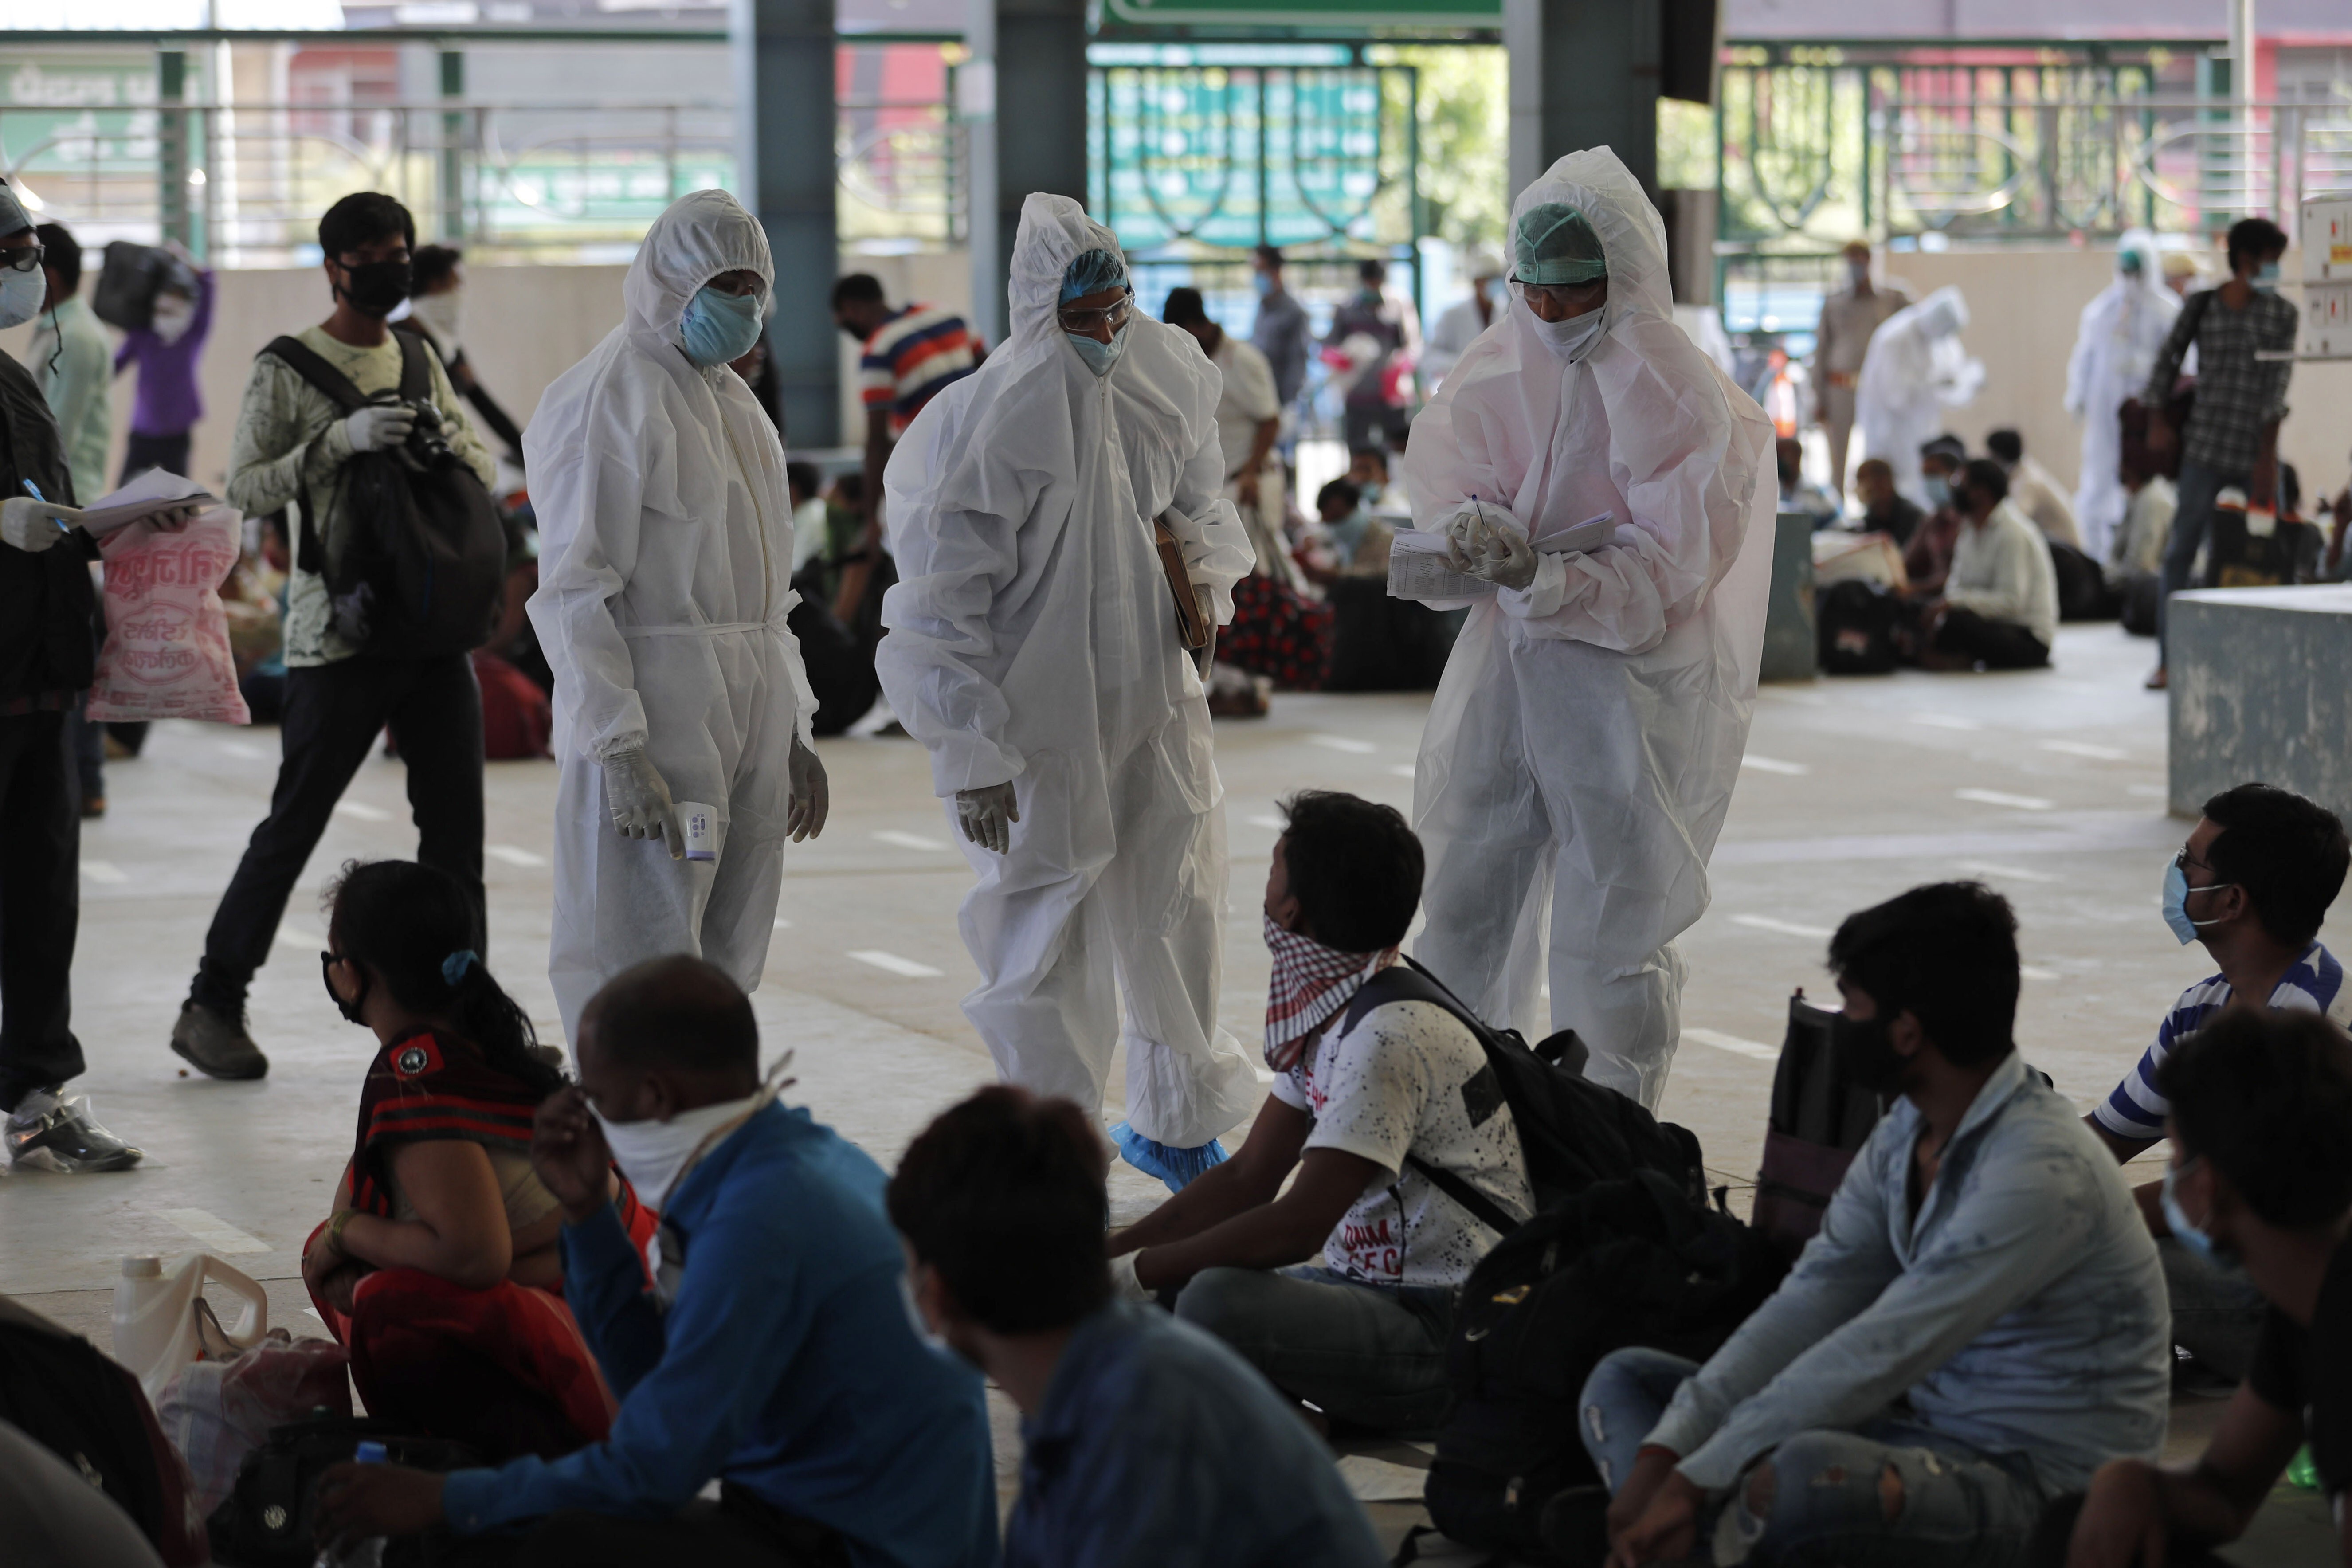 Indian health workers examine migrant labourers on Wednesday. Some 3,600 Hong Kong residents are currently stranded in the country, which is on nationwide lockdown. Photo: AP